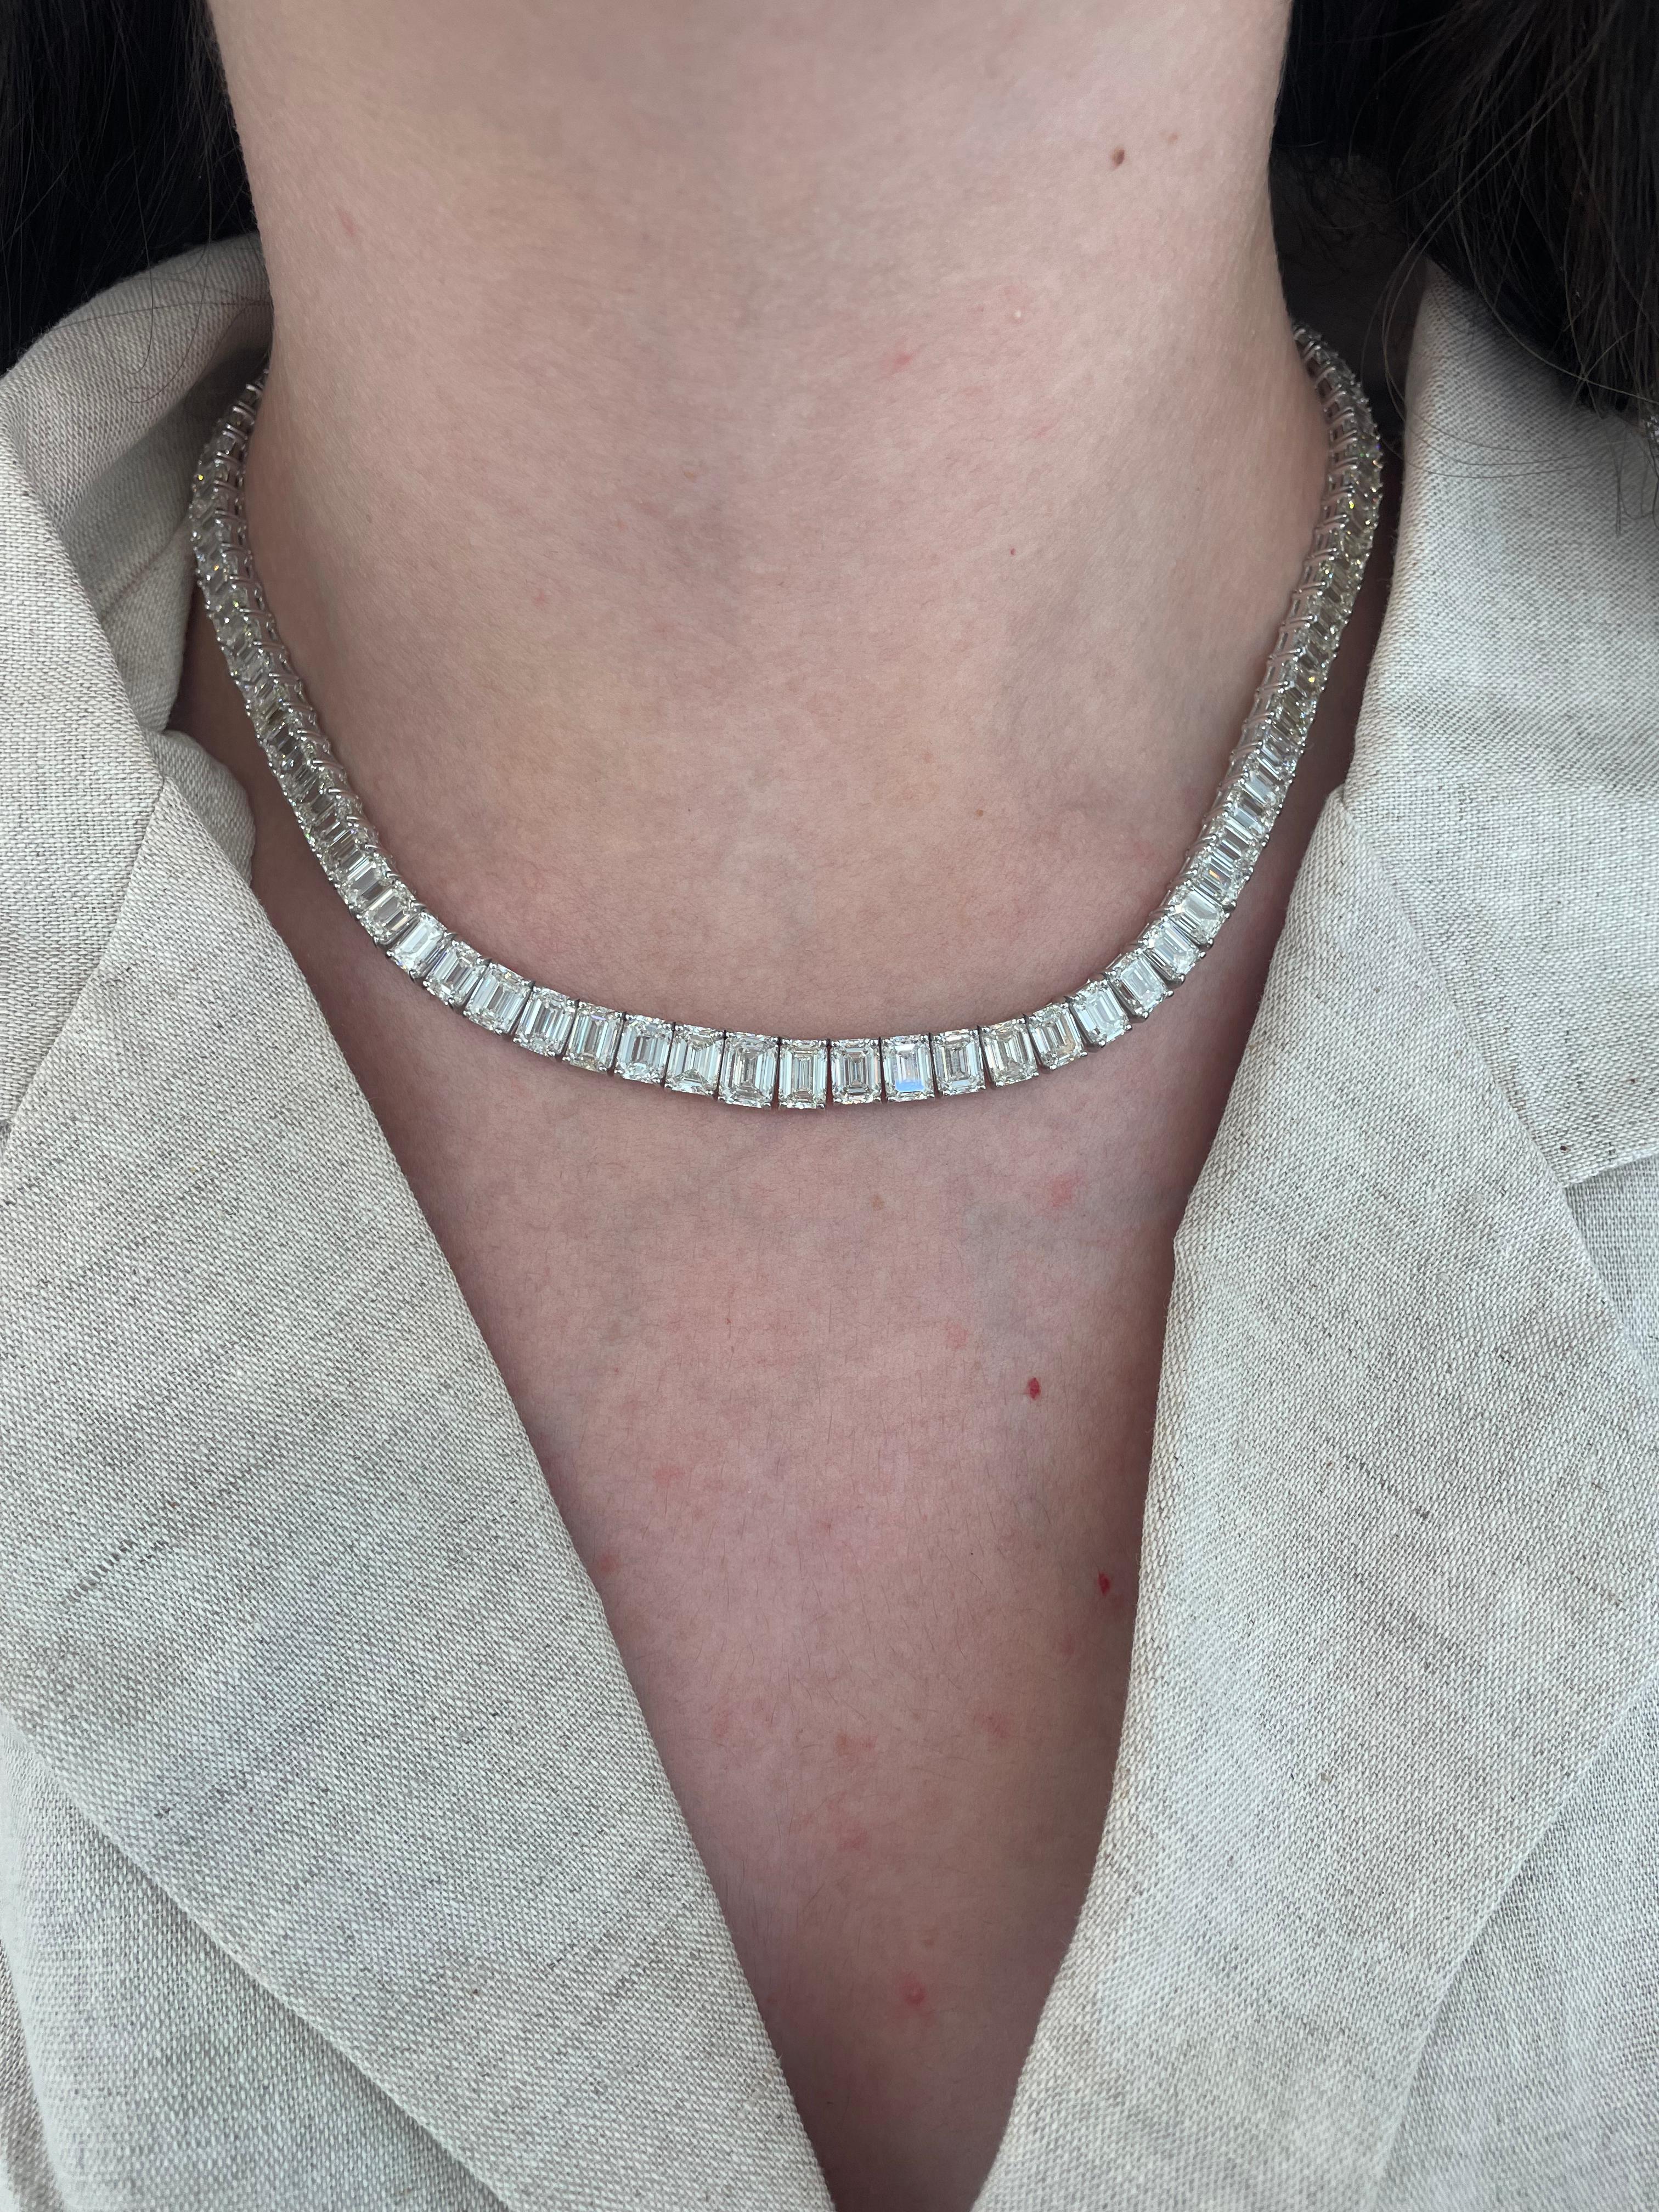 Beautiful and classic diamond tennis riviera necklace, GIA certified, by Alexander Beverly Hills.
101 emerald cut diamonds diamonds, 55.79 carats, 11 stones GIA certified. Approximately H-K color and VVS1-VS2 clarity. 18k white gold,